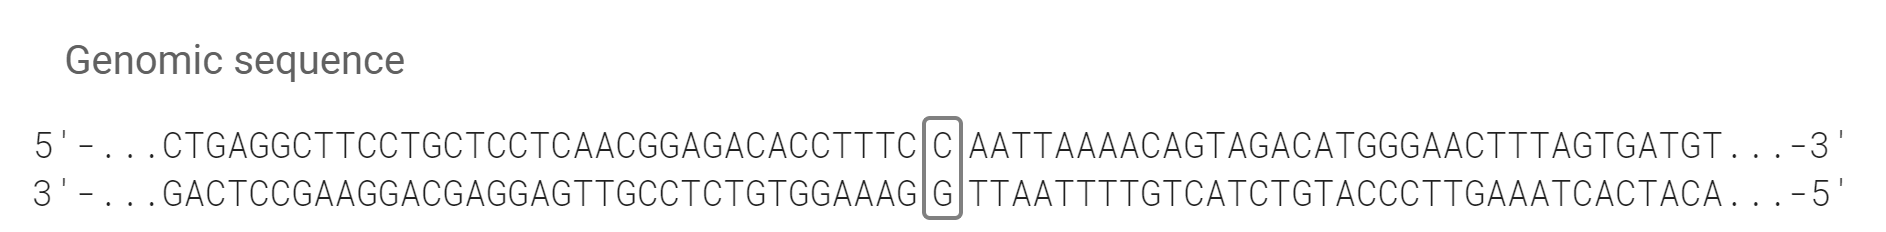 Genomic Sequence